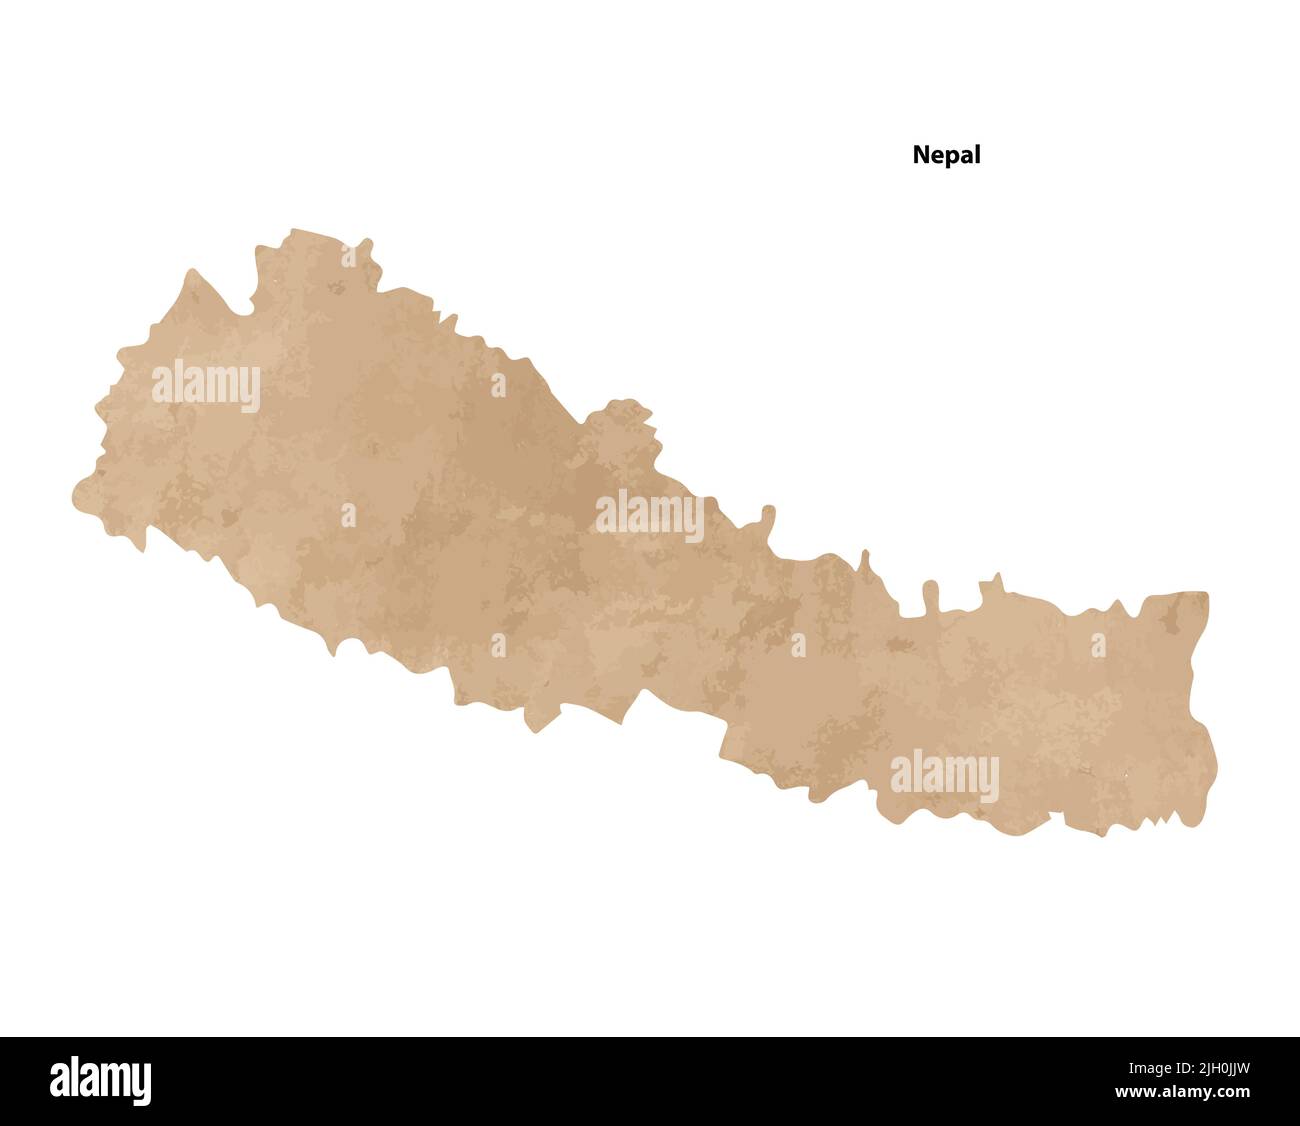 Old vintage paper textured map of Nepal Country - Vector illustration Stock Vector